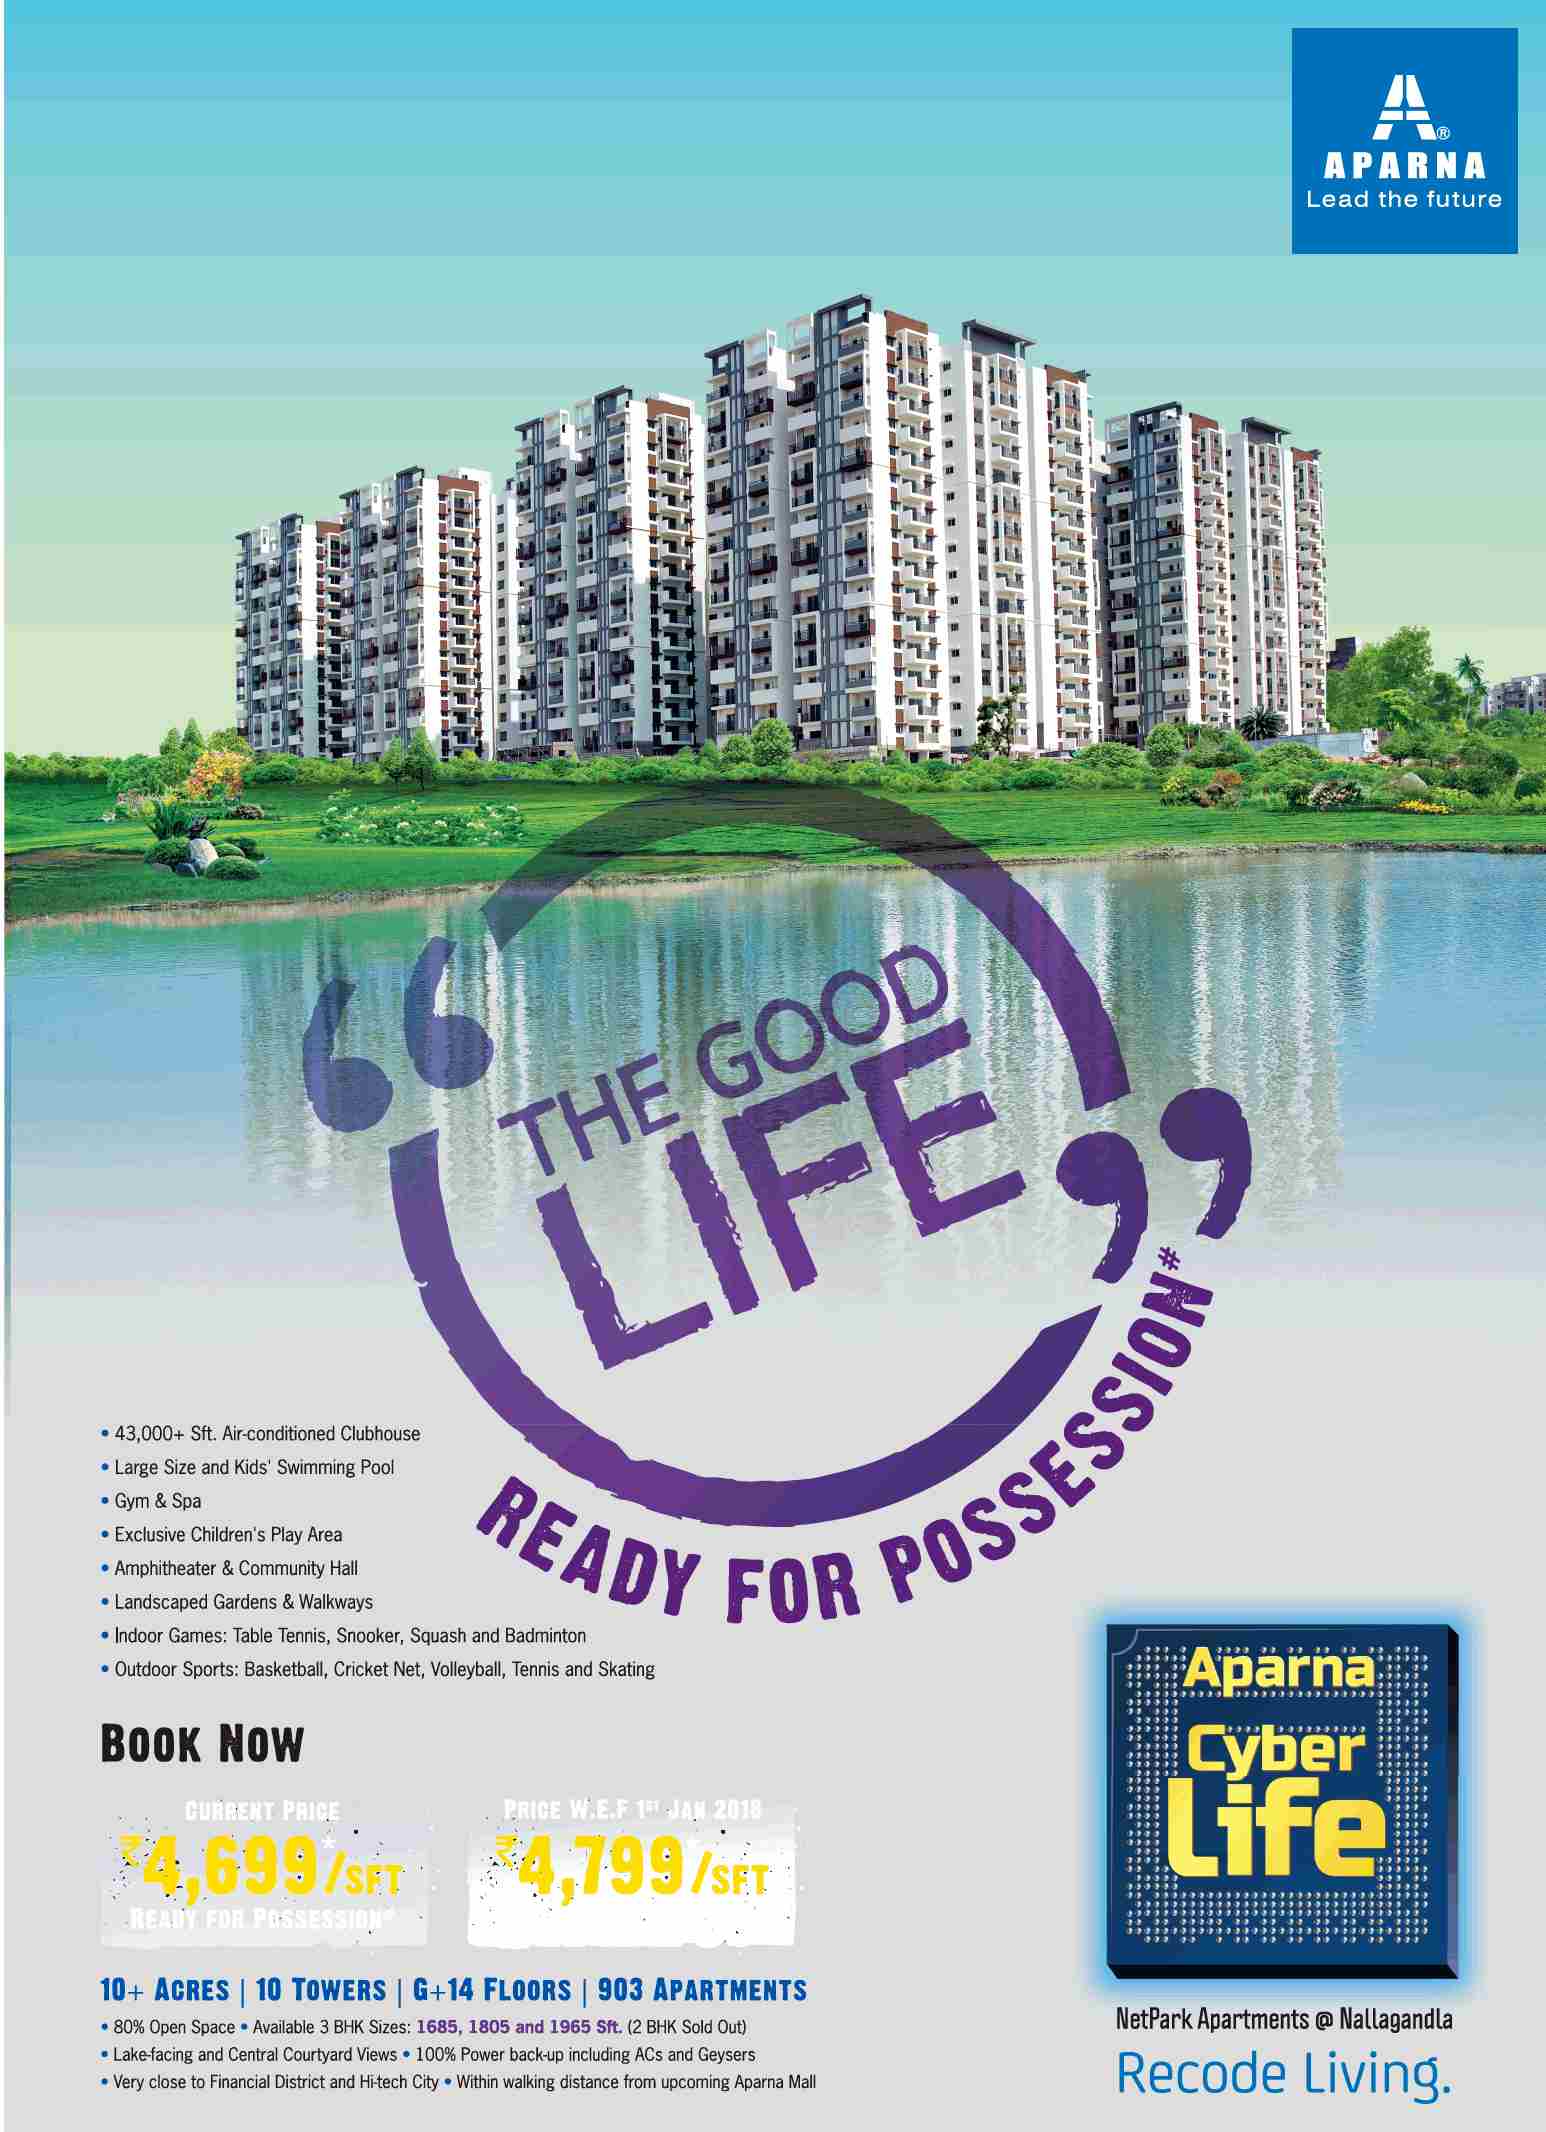 Recode your living by staying at Aparna Cyber Life in Hyderabad